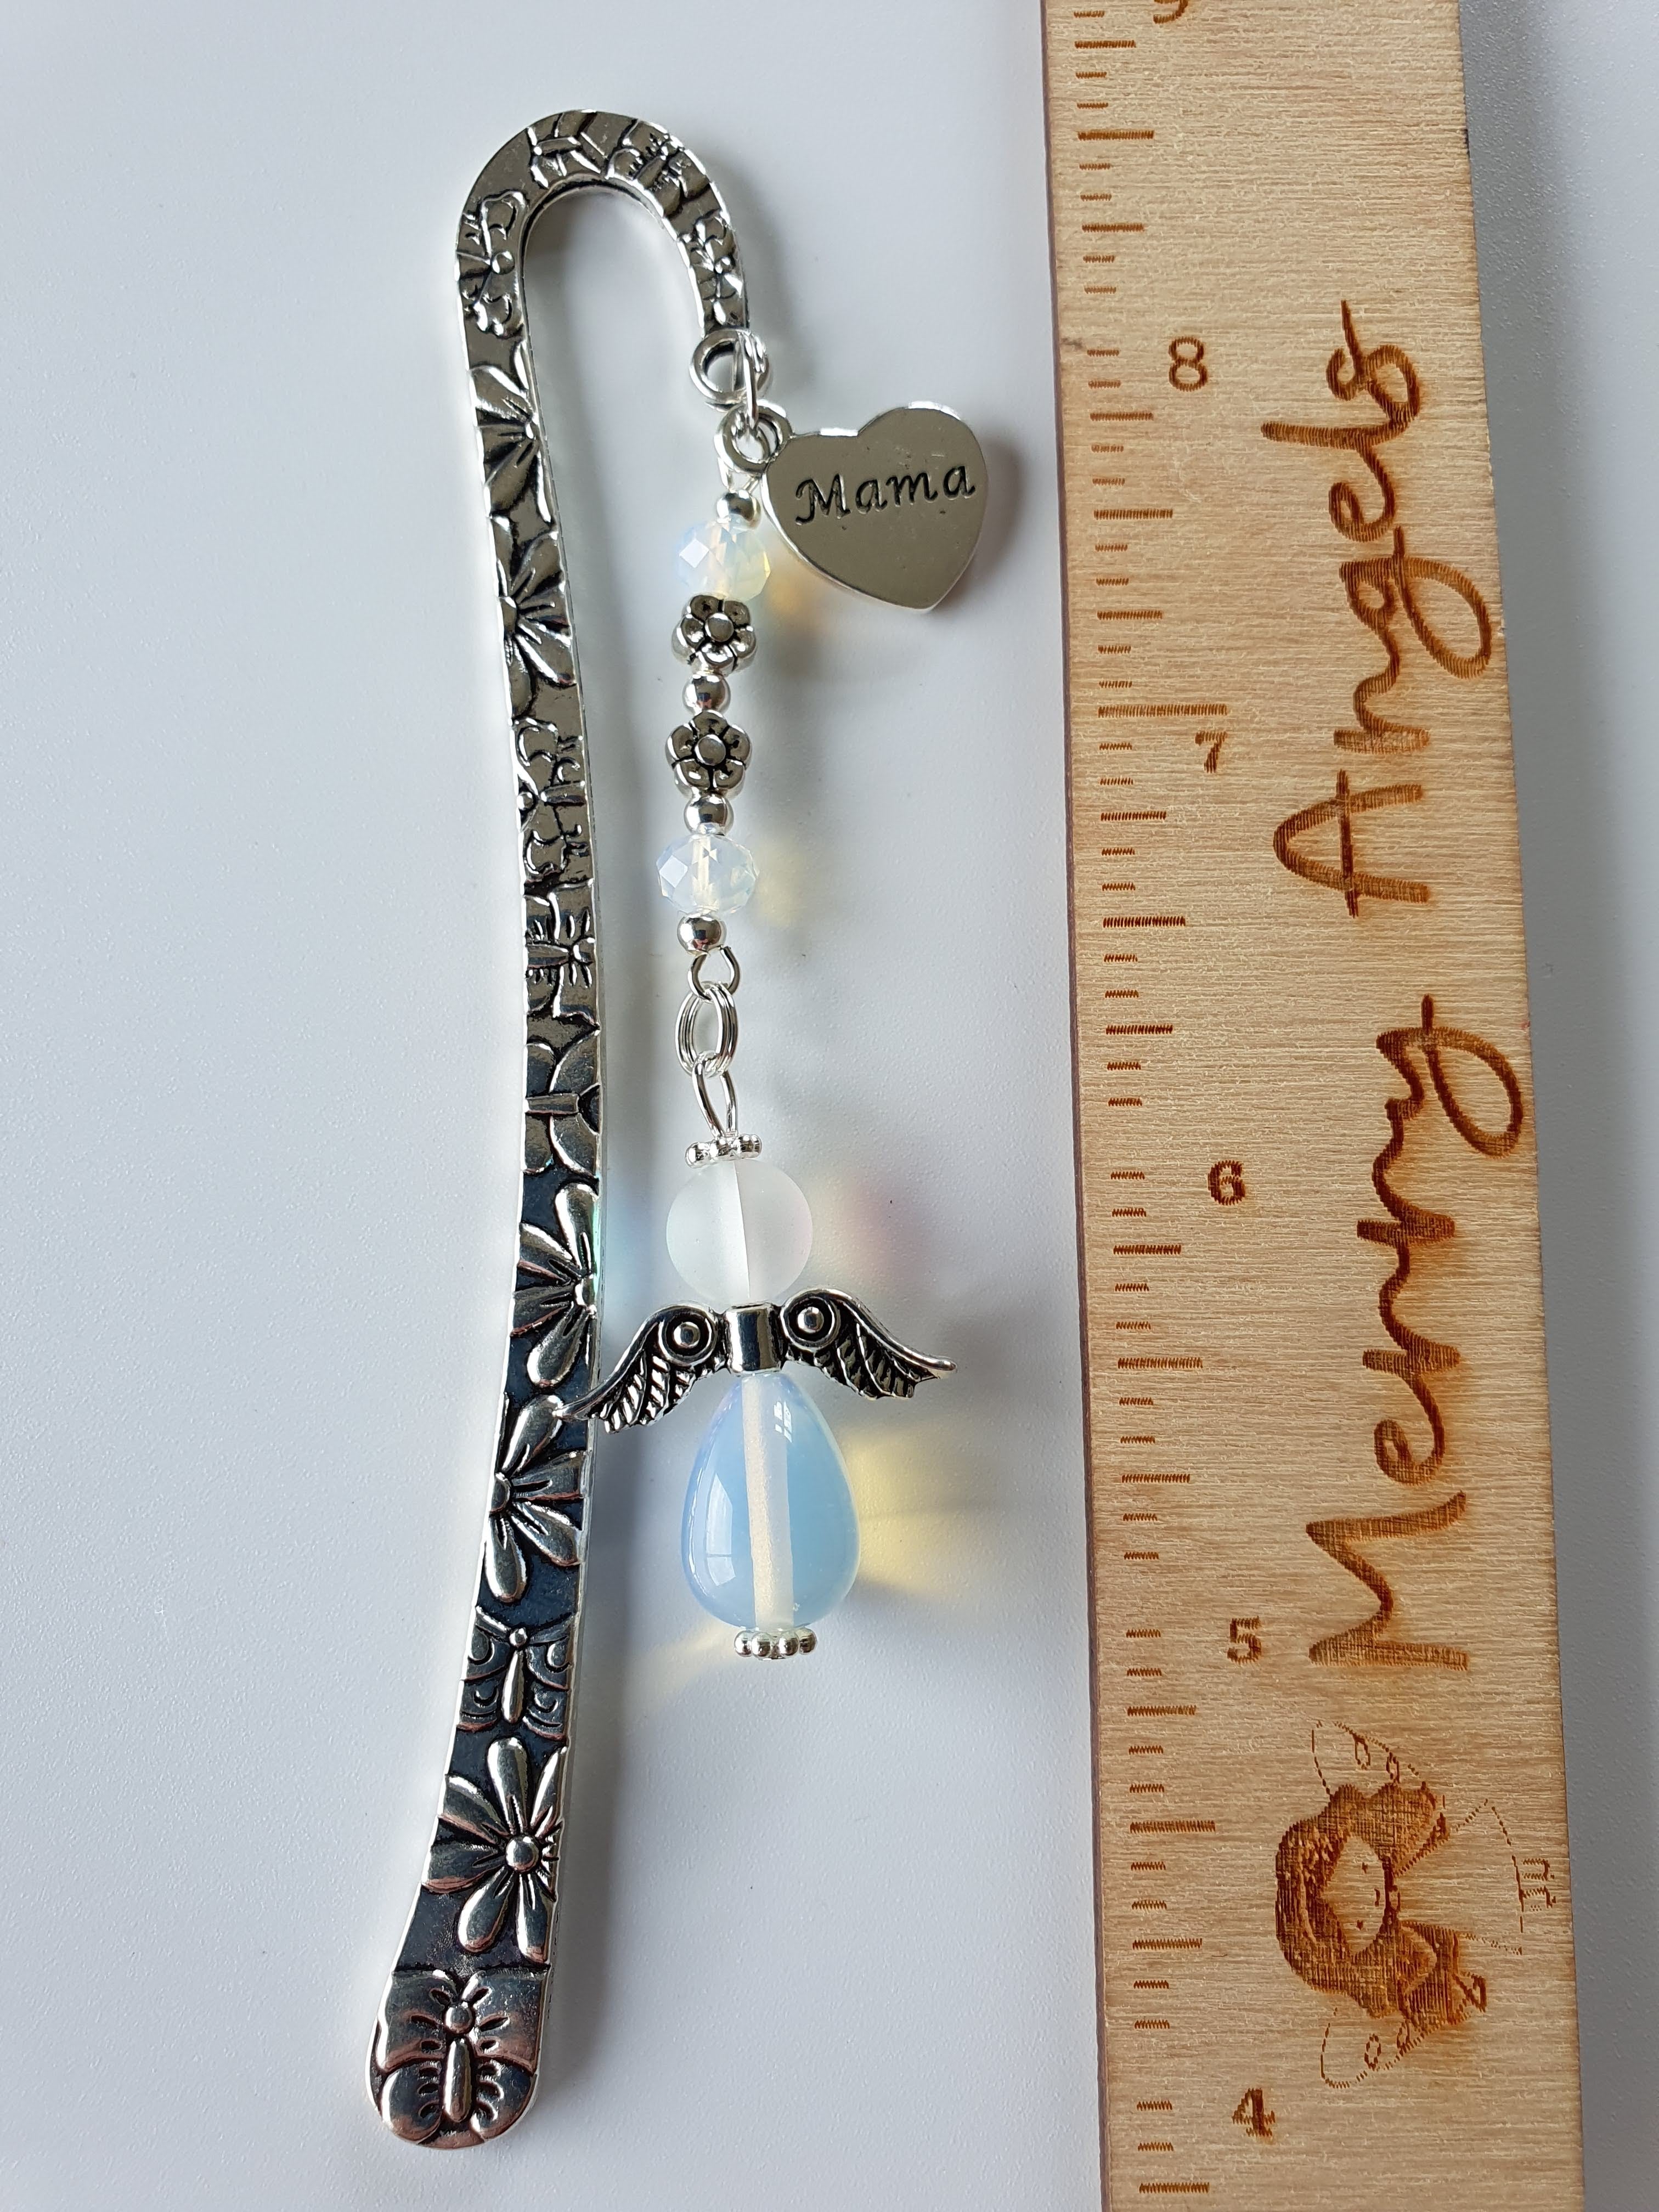 This is a picture of a silver bookmark with a white and blue angel and 'mama' charm